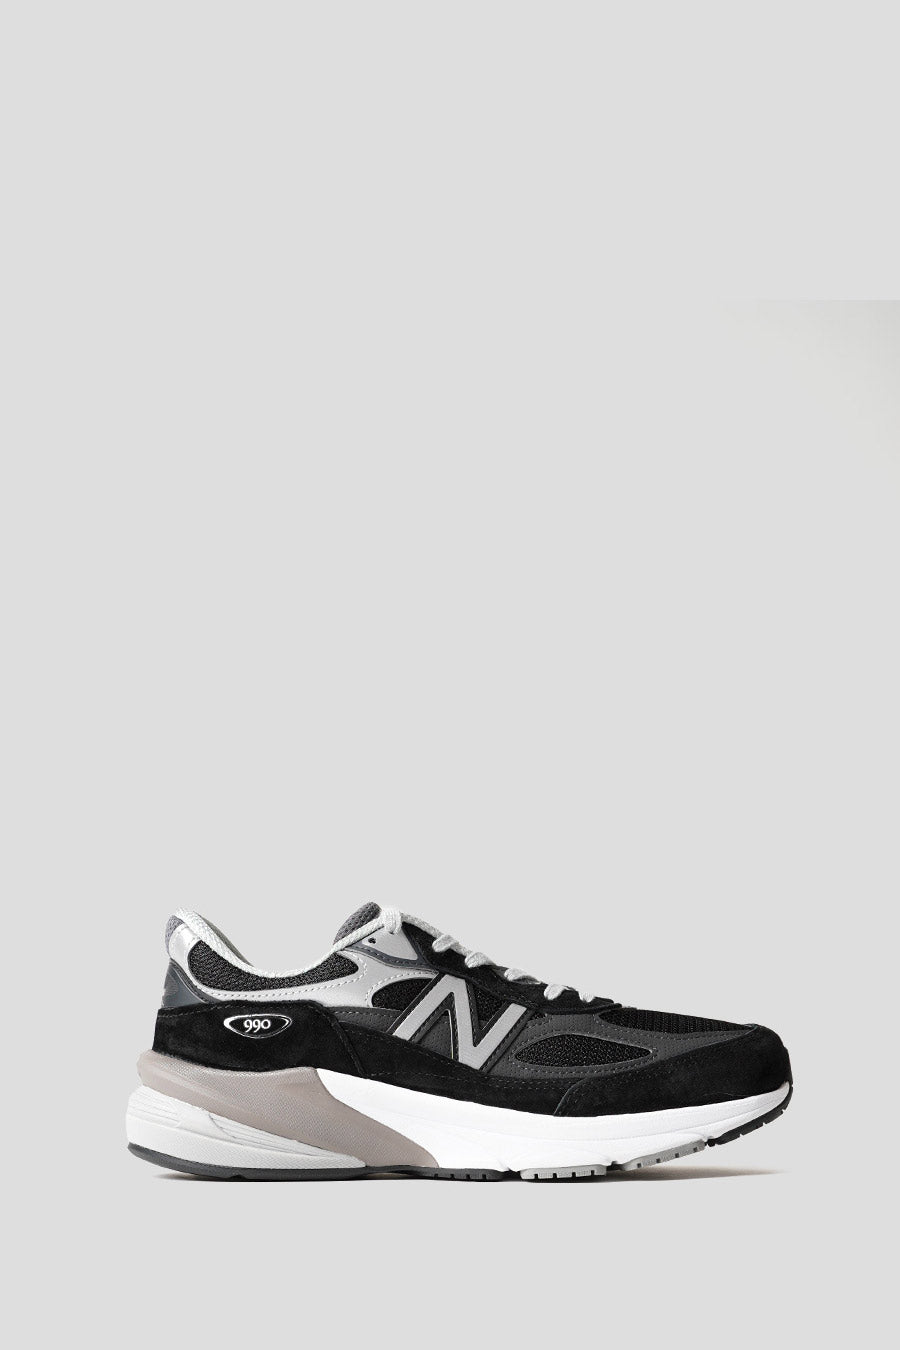 NEW BALANCE - SNEAKERS MADE IN USA 990 V6 NOIRES ET GRISES - LE LABO STORE